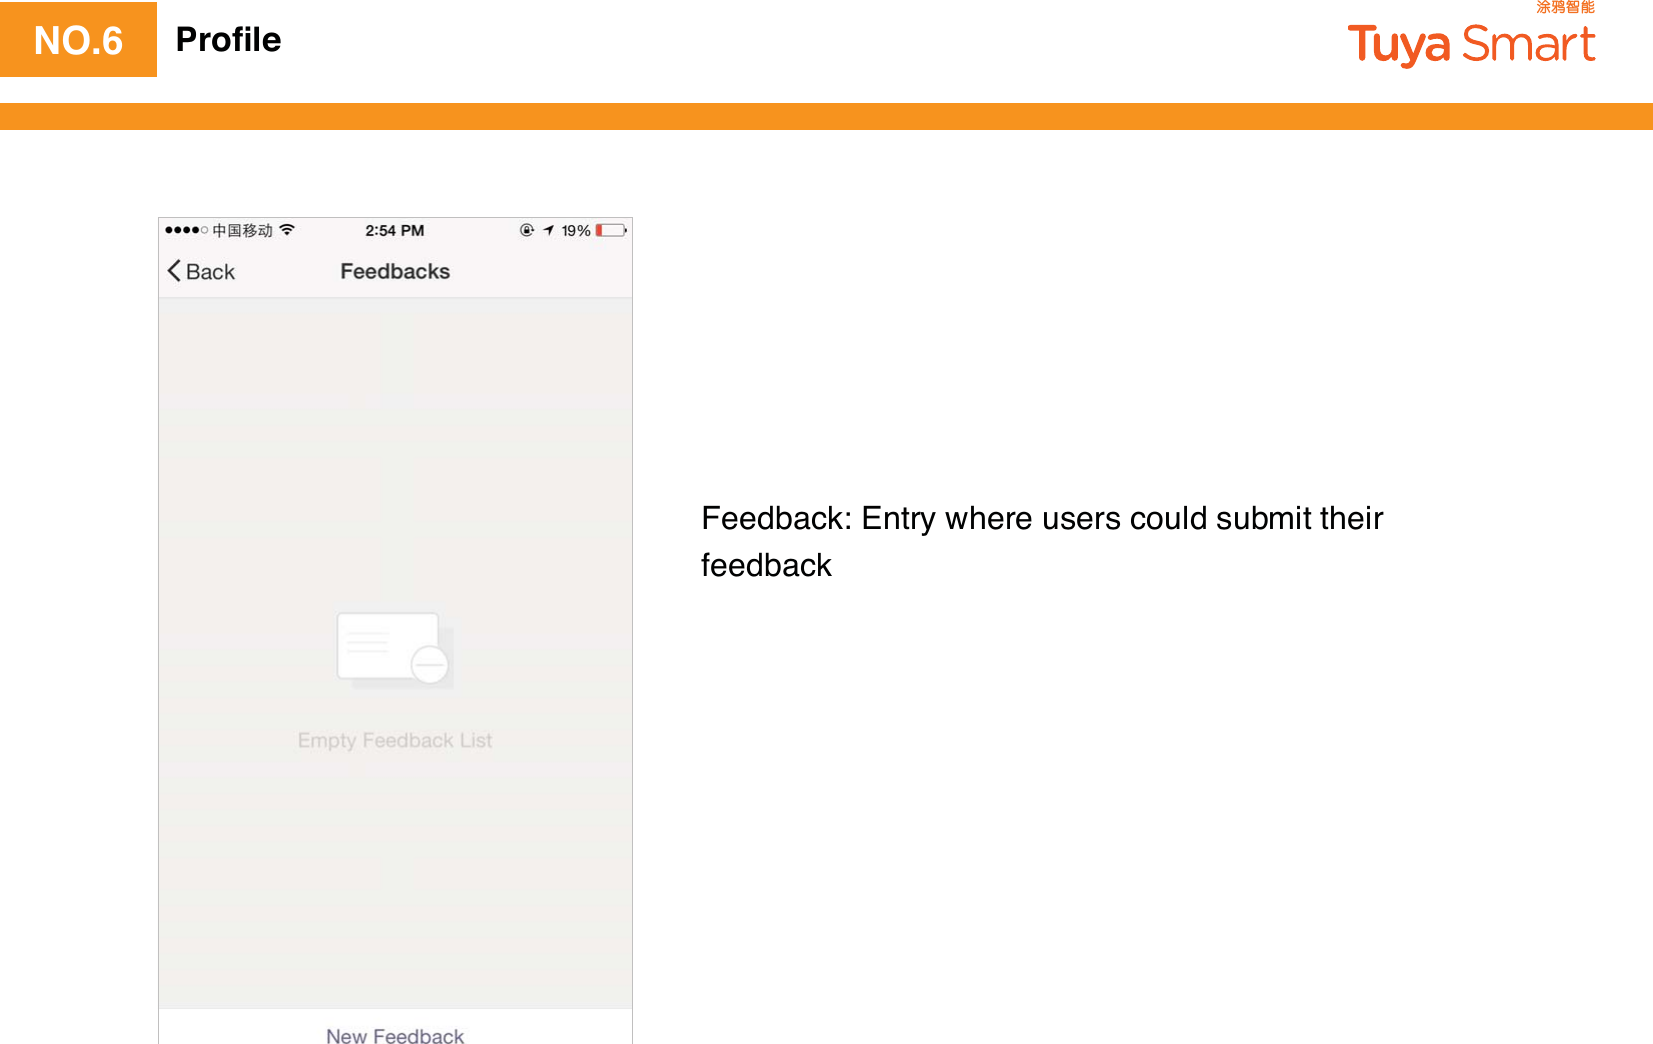 Feedback: Entry where users could submit their feedbackNO.6 Proﬁle